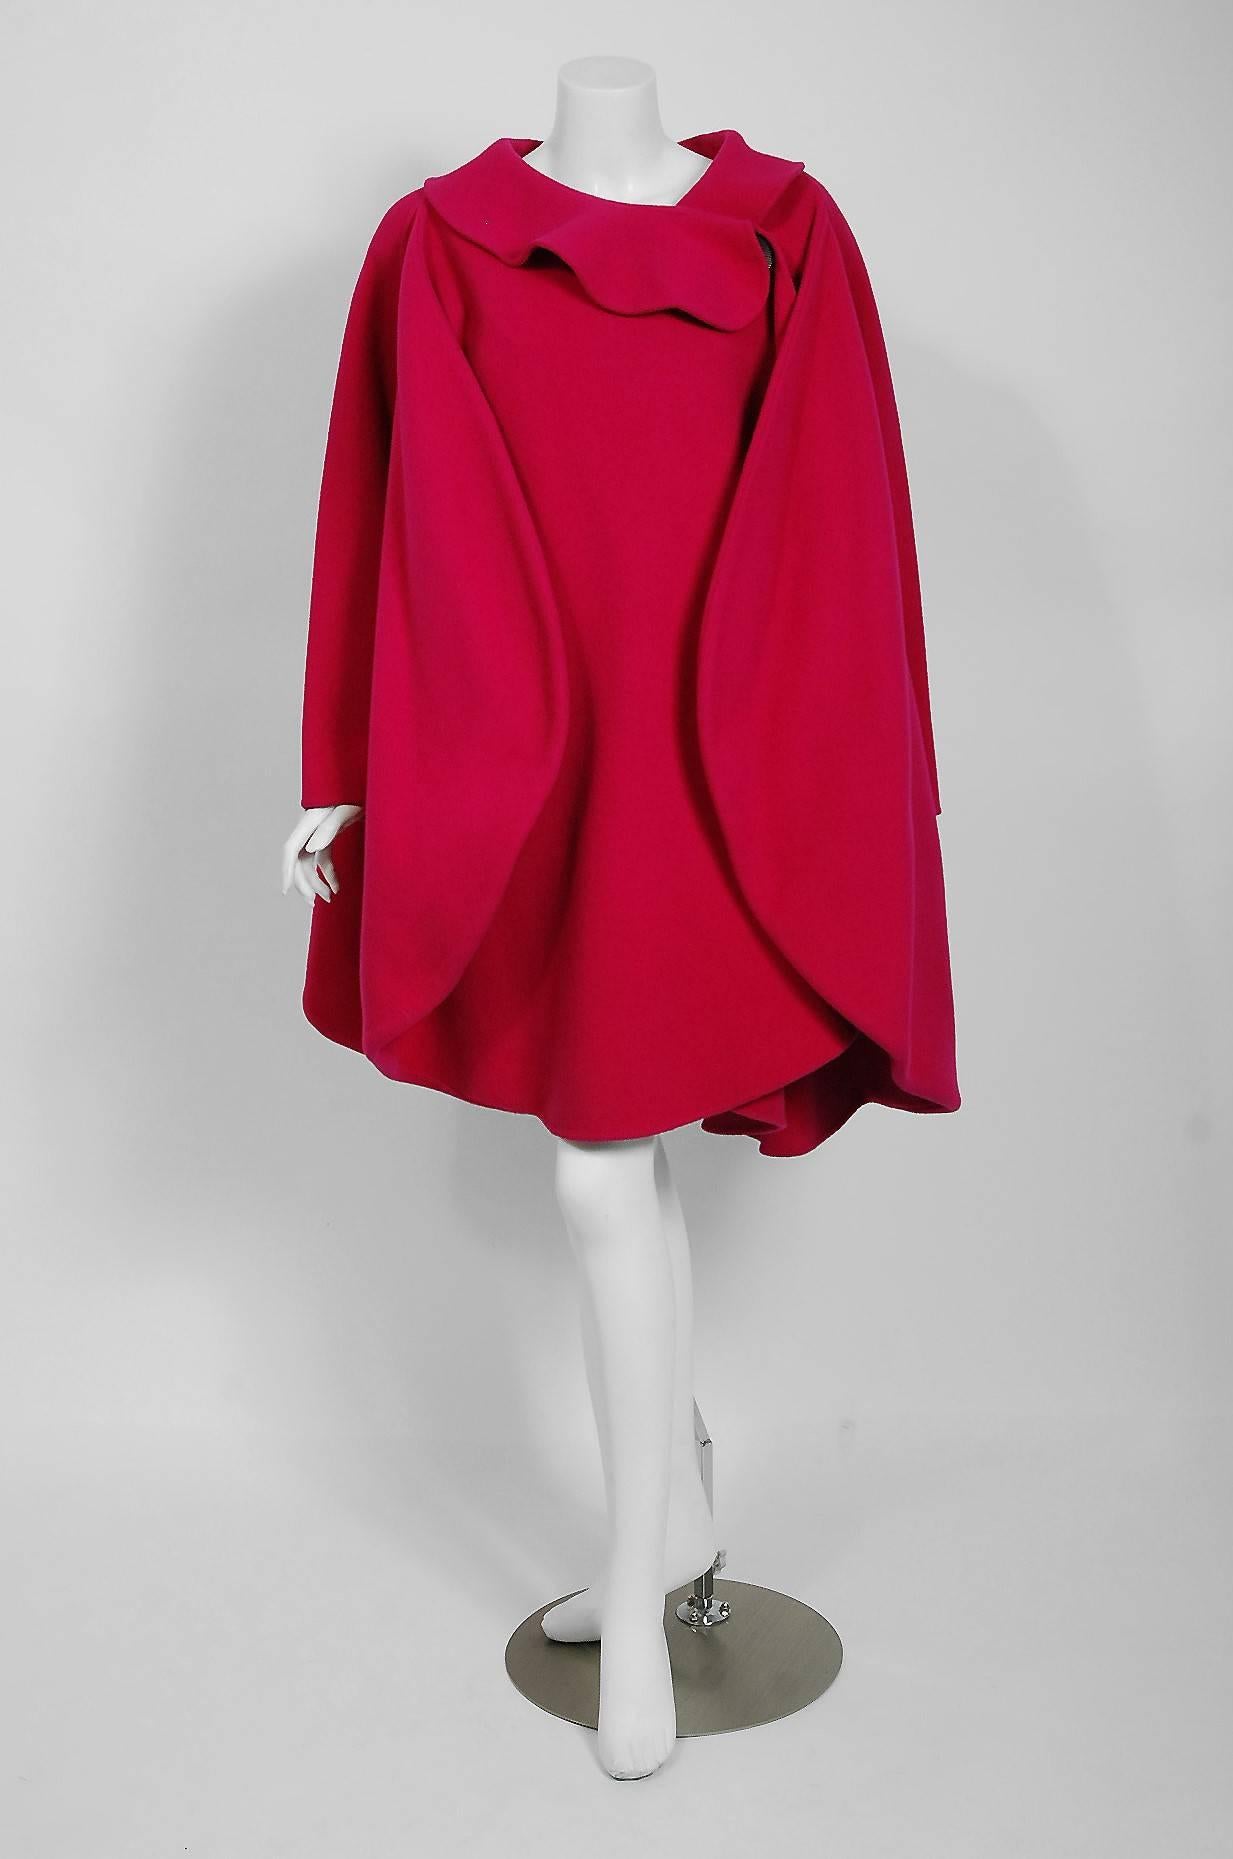 Spectacular 1987 Pierre Cardin Haute-Couture documented coat in the prettiest magenta pink color. In 1951 Cardin opened his own couture house and by 1957, he started a ready-to-wear line; a bold move for a French couturier at the time. Cardin is